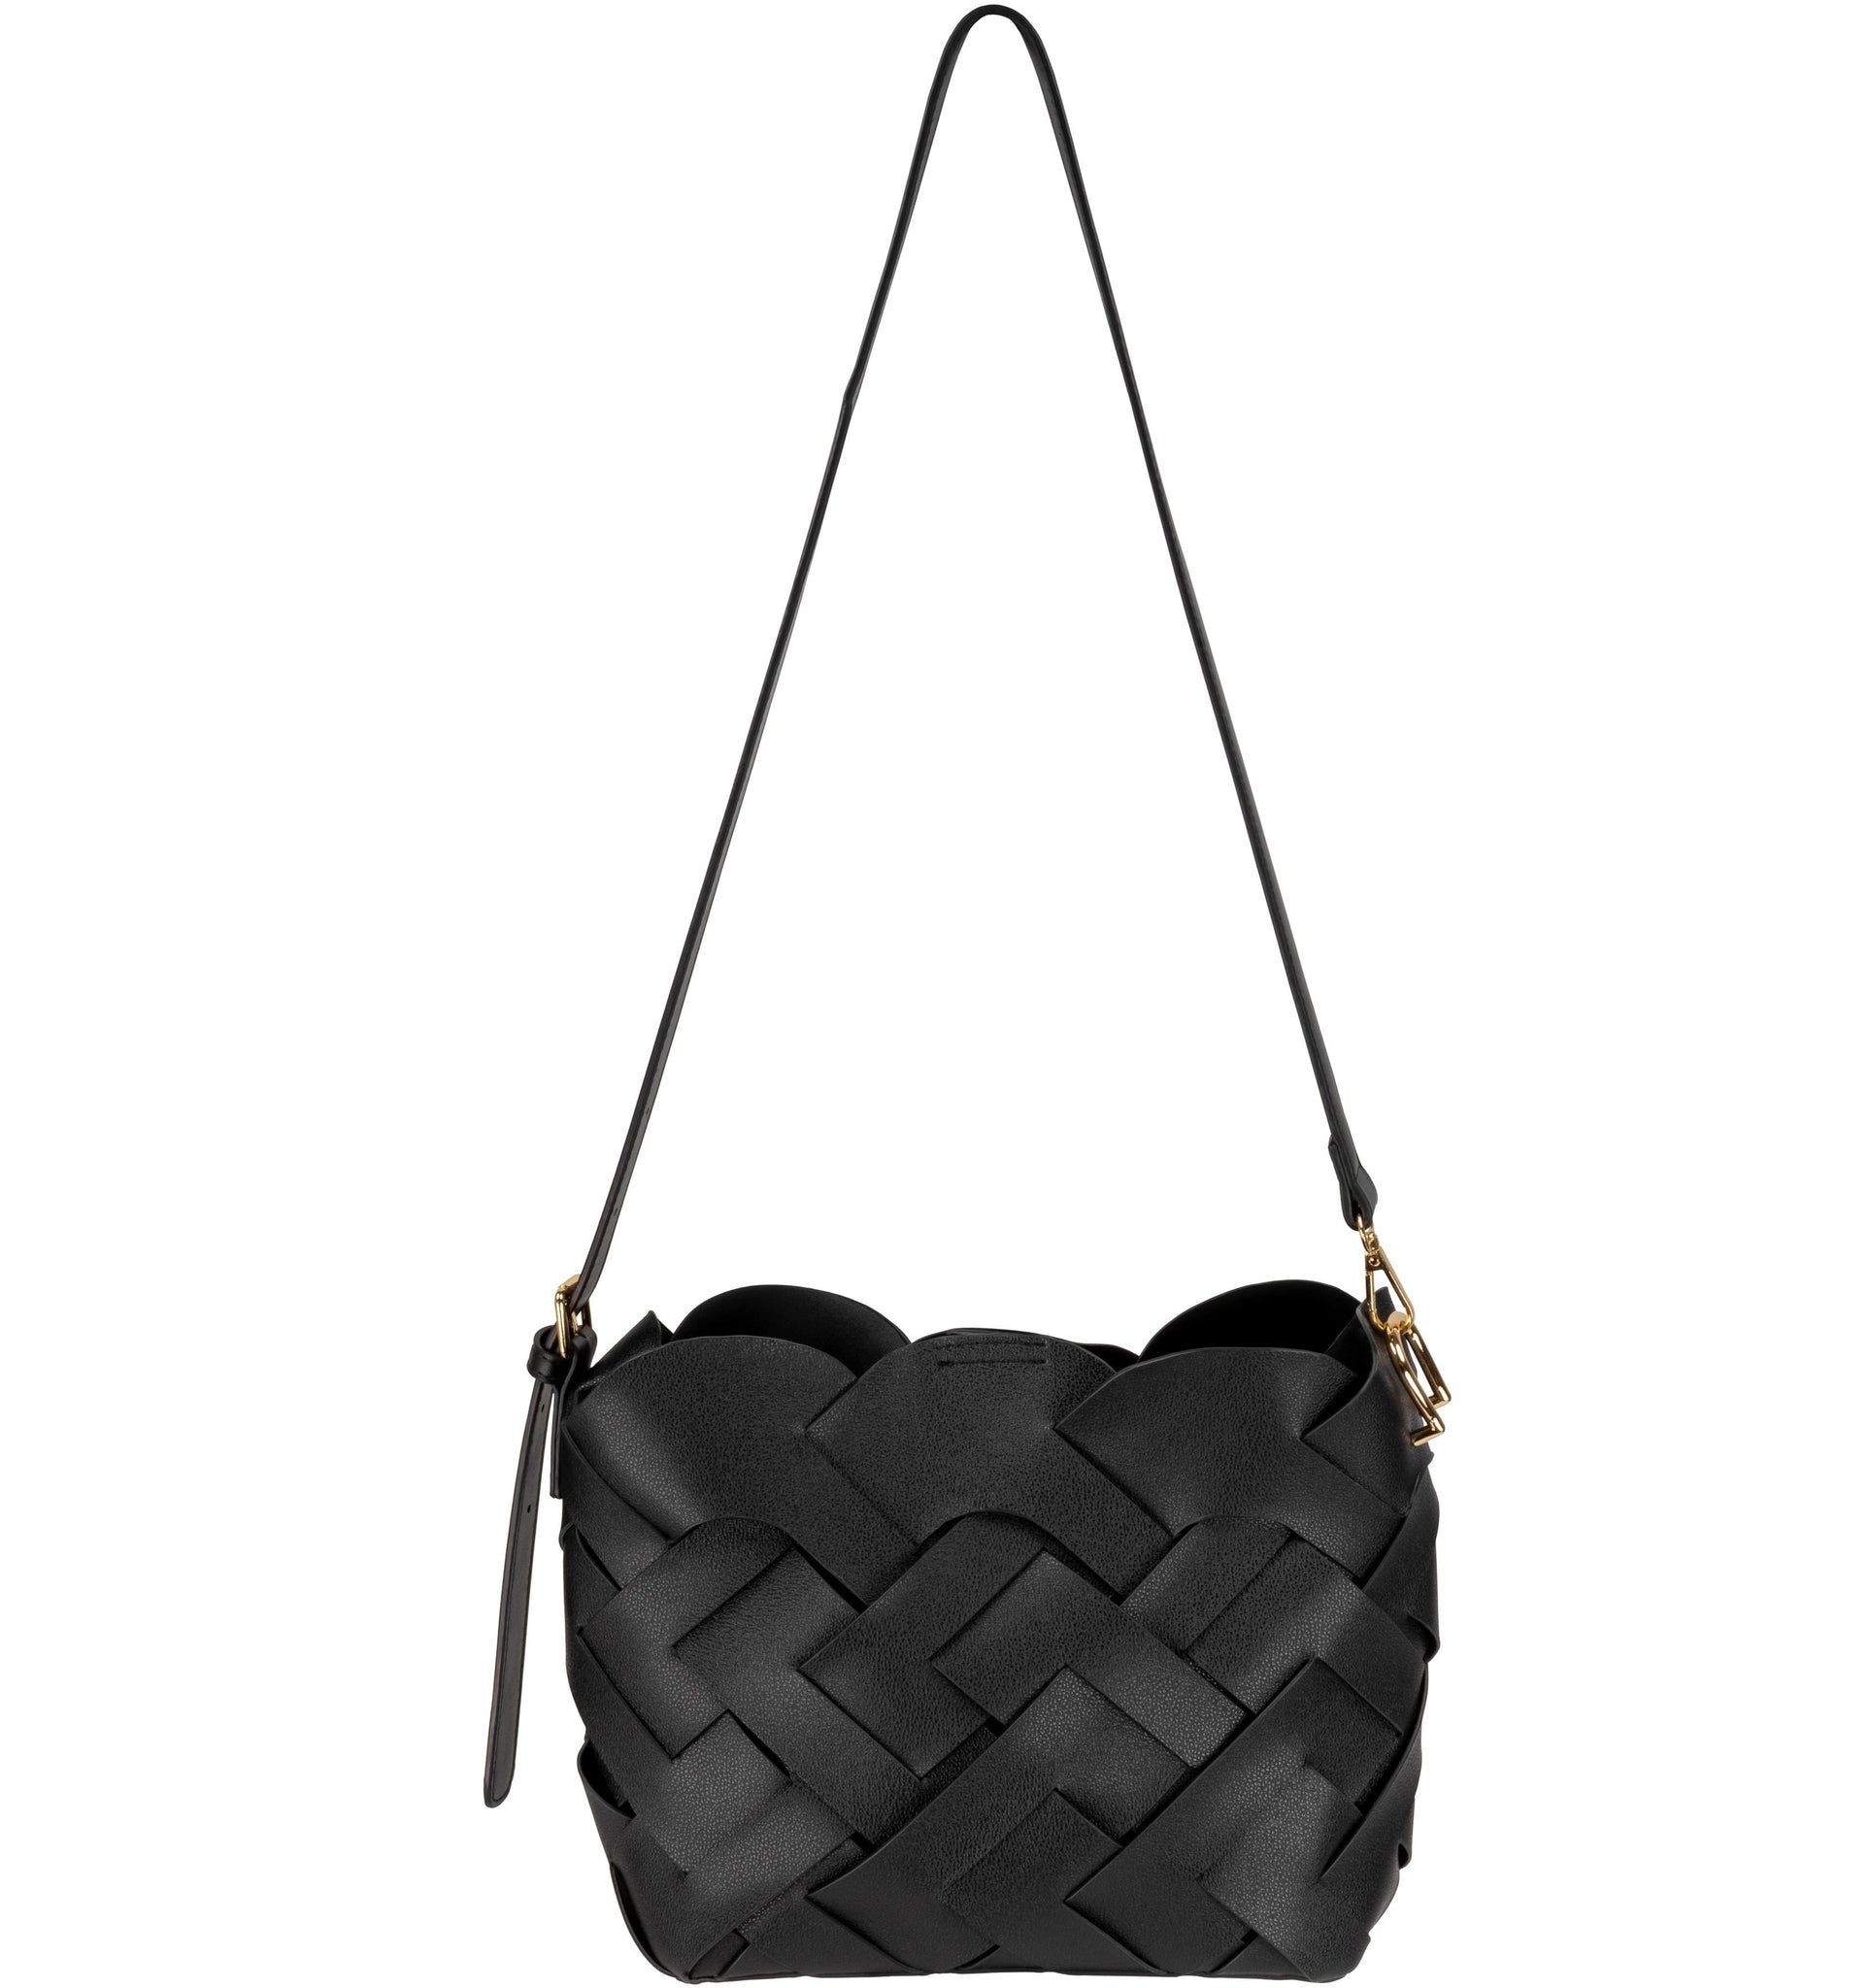 Faux Leather Woven Cross Body with Adjustable Strap